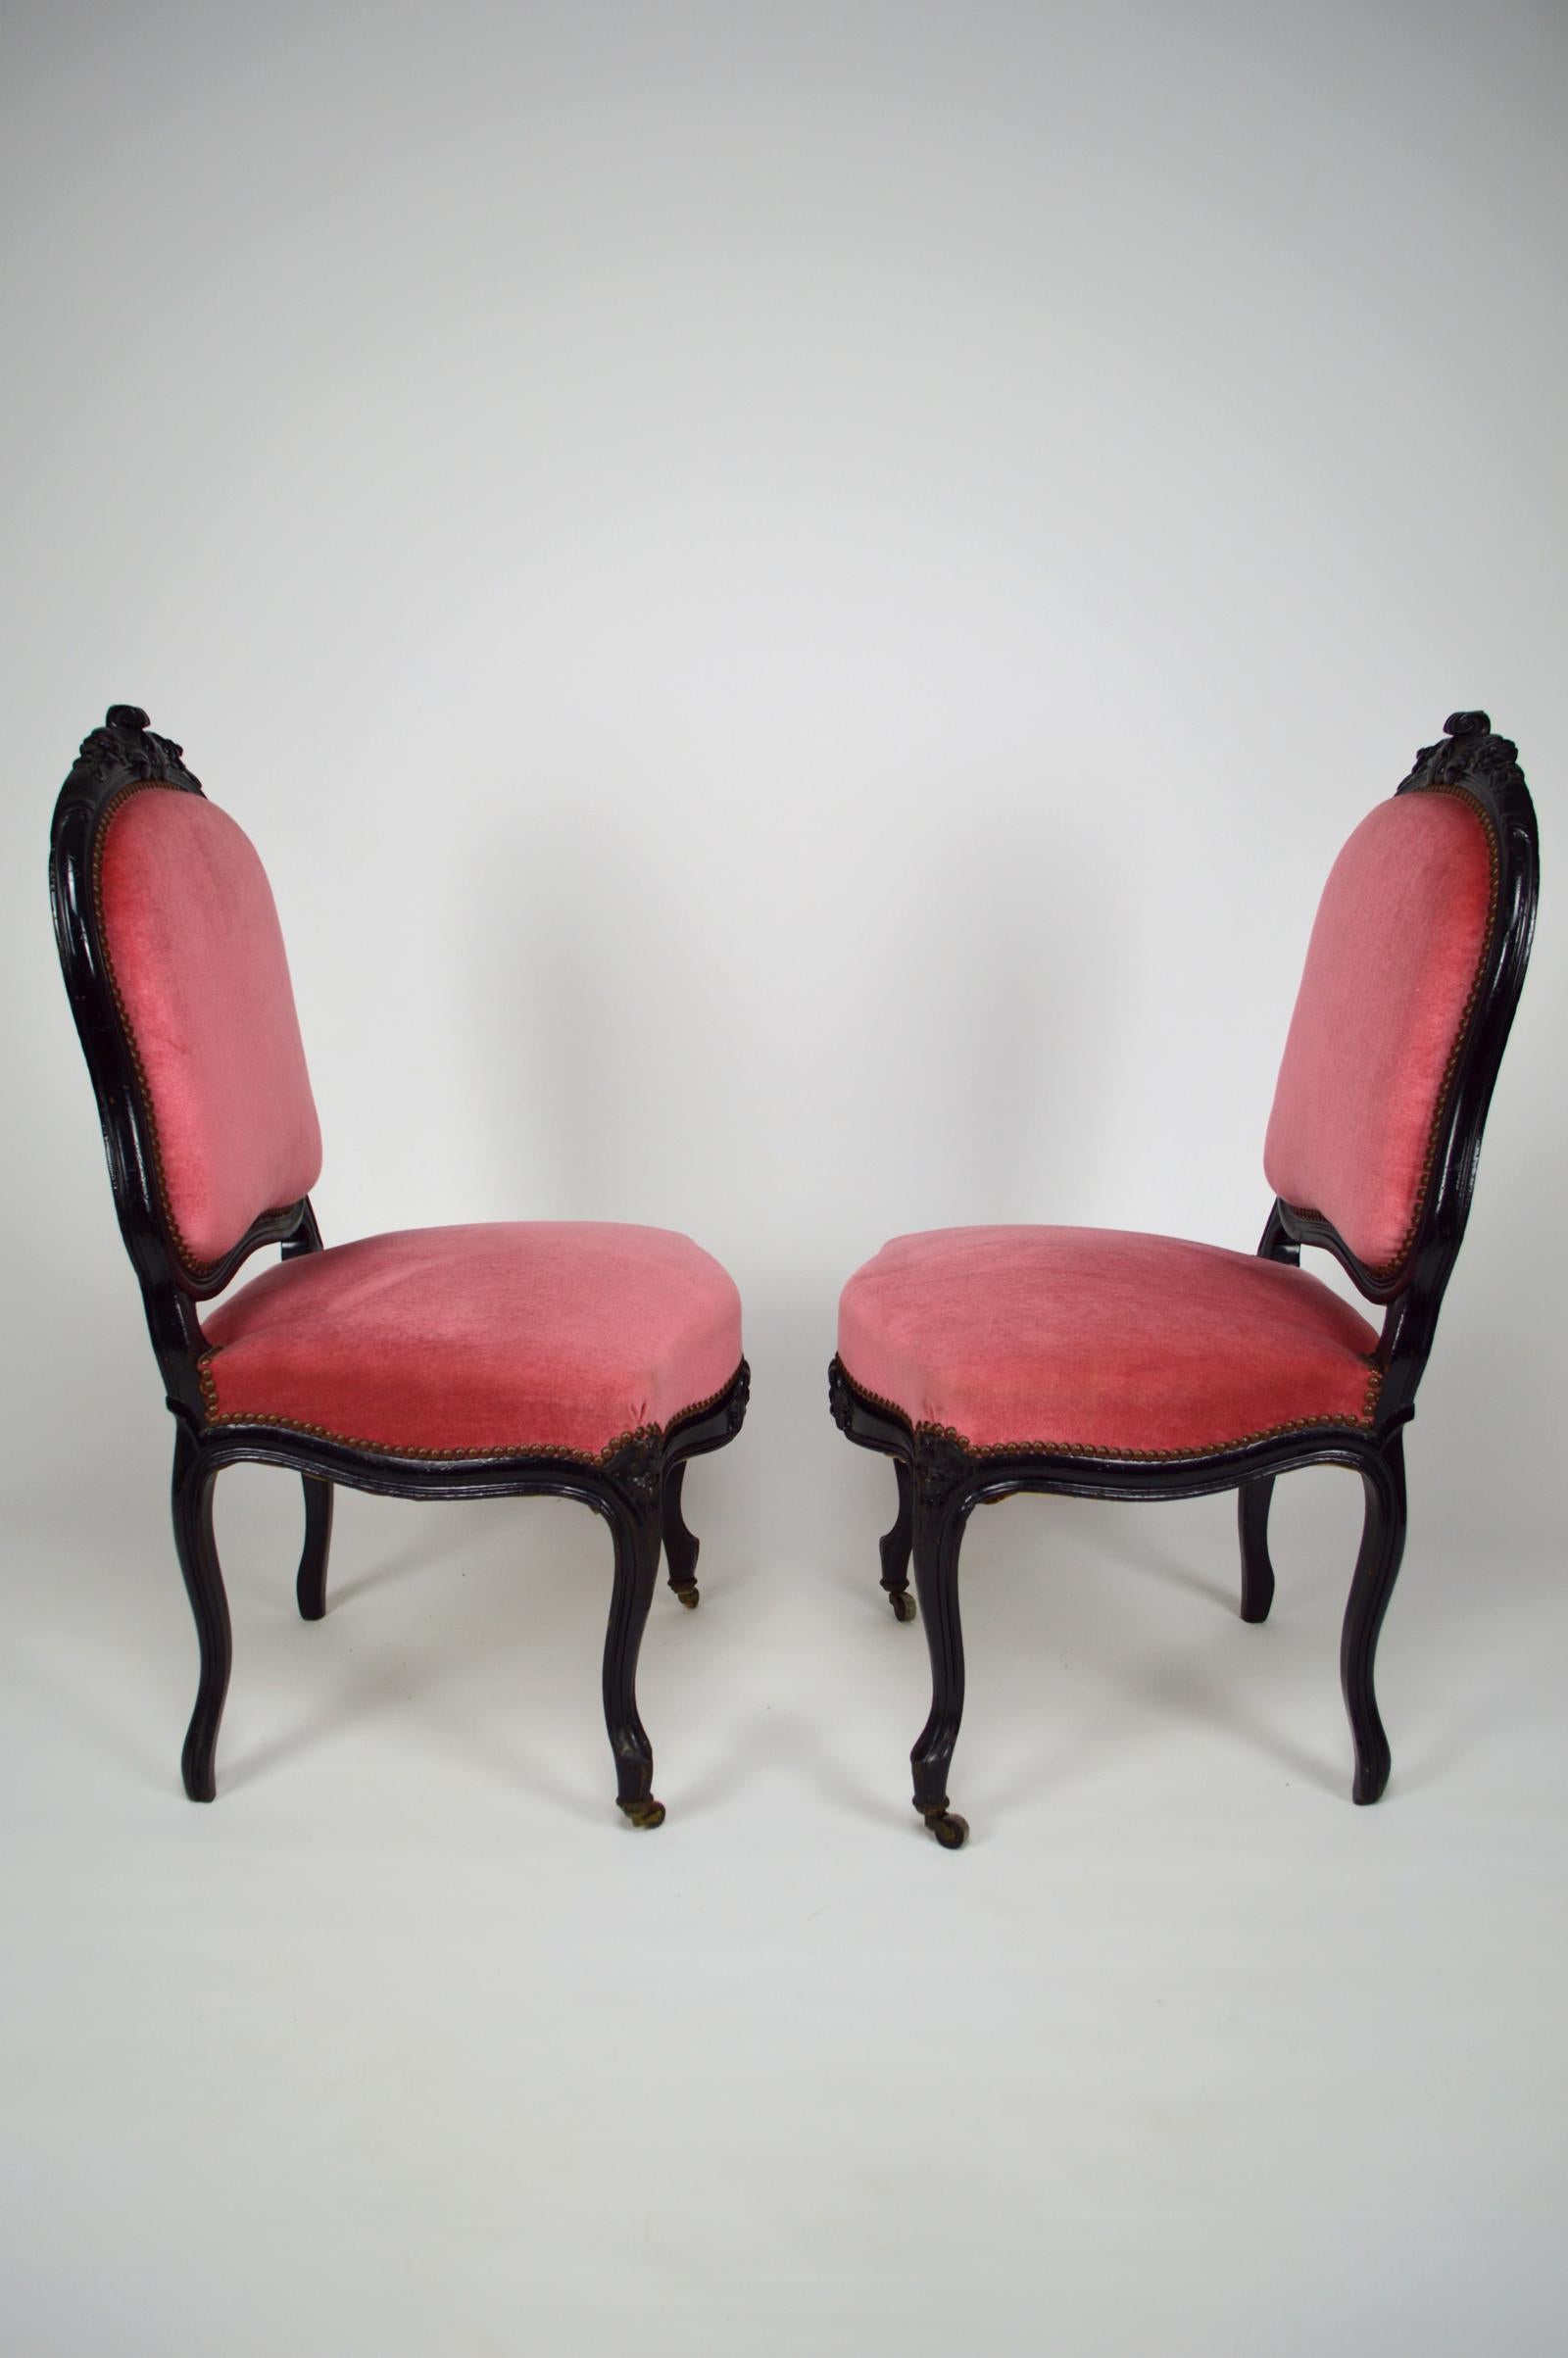 Napoleon III Chairs in Ebonized Wood and Pink Velvet, France, circa 1870 For Sale 1